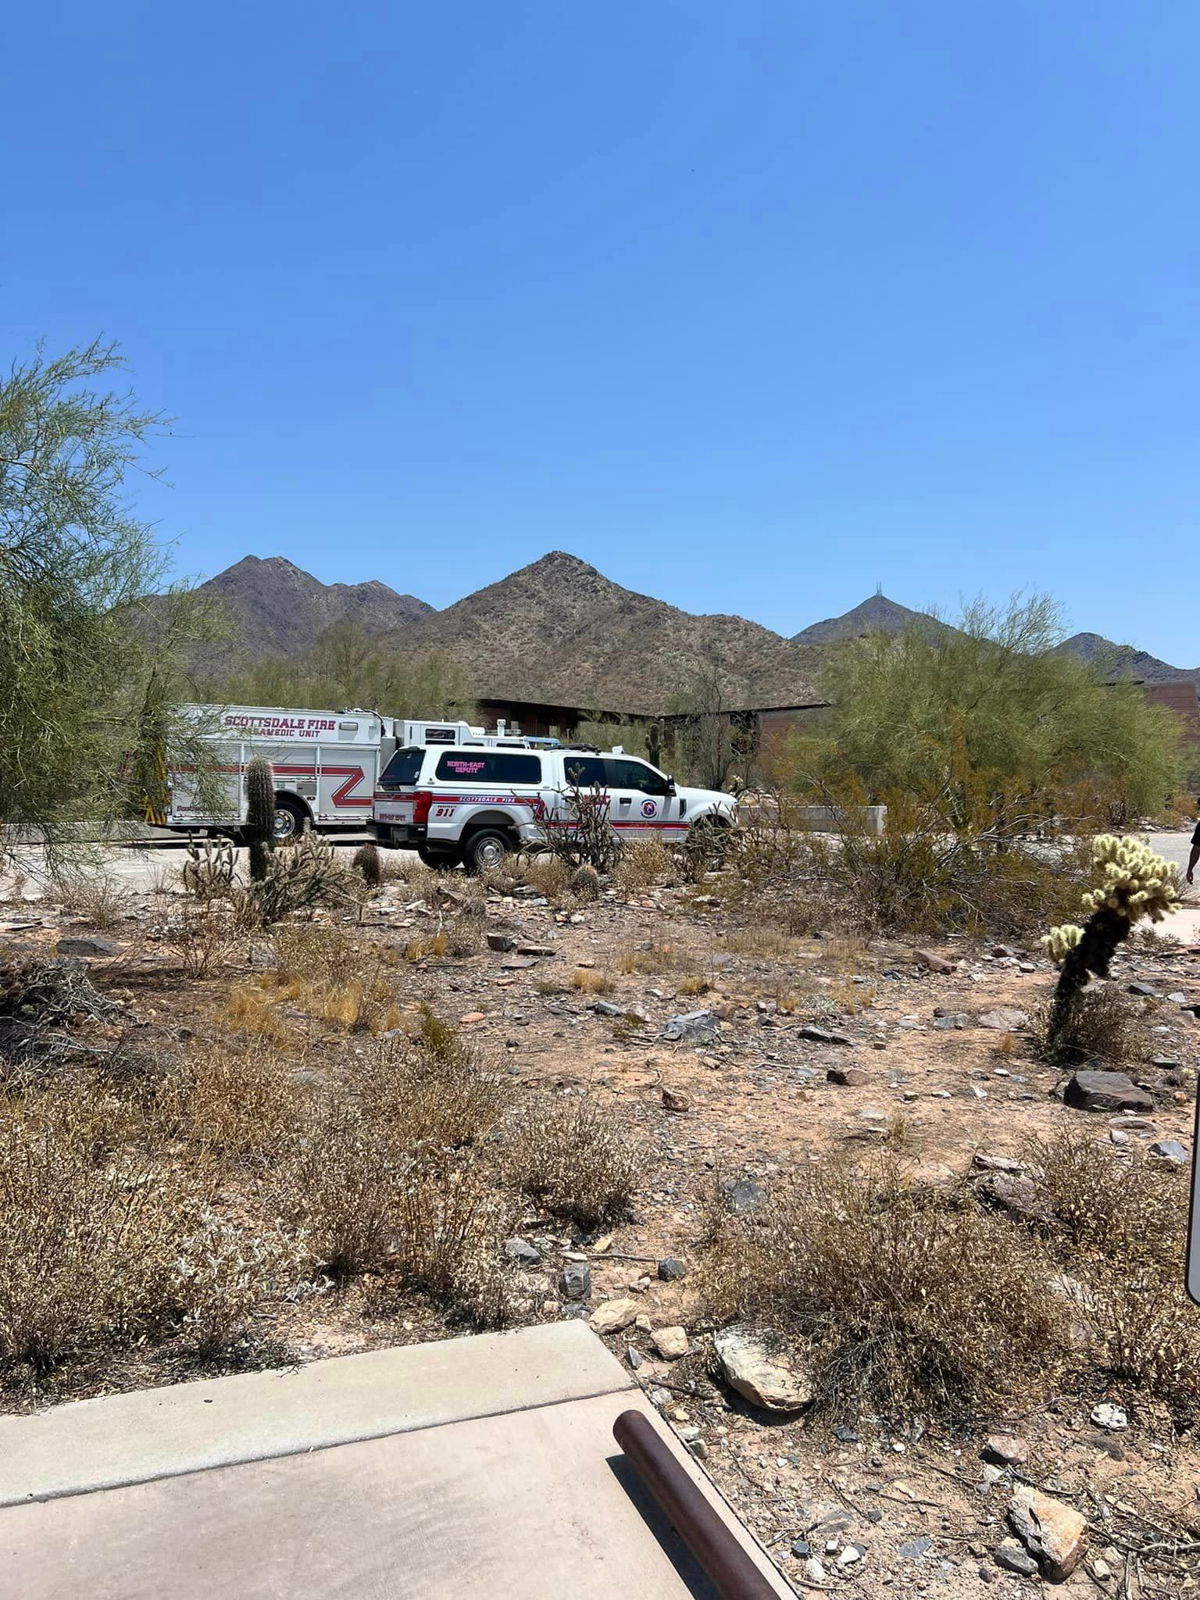 <i>Scottsdale Fire Department via CNN Newsource</i><br/>A group of 13 hikers were rescued from an Arizona trail amid scorching heat